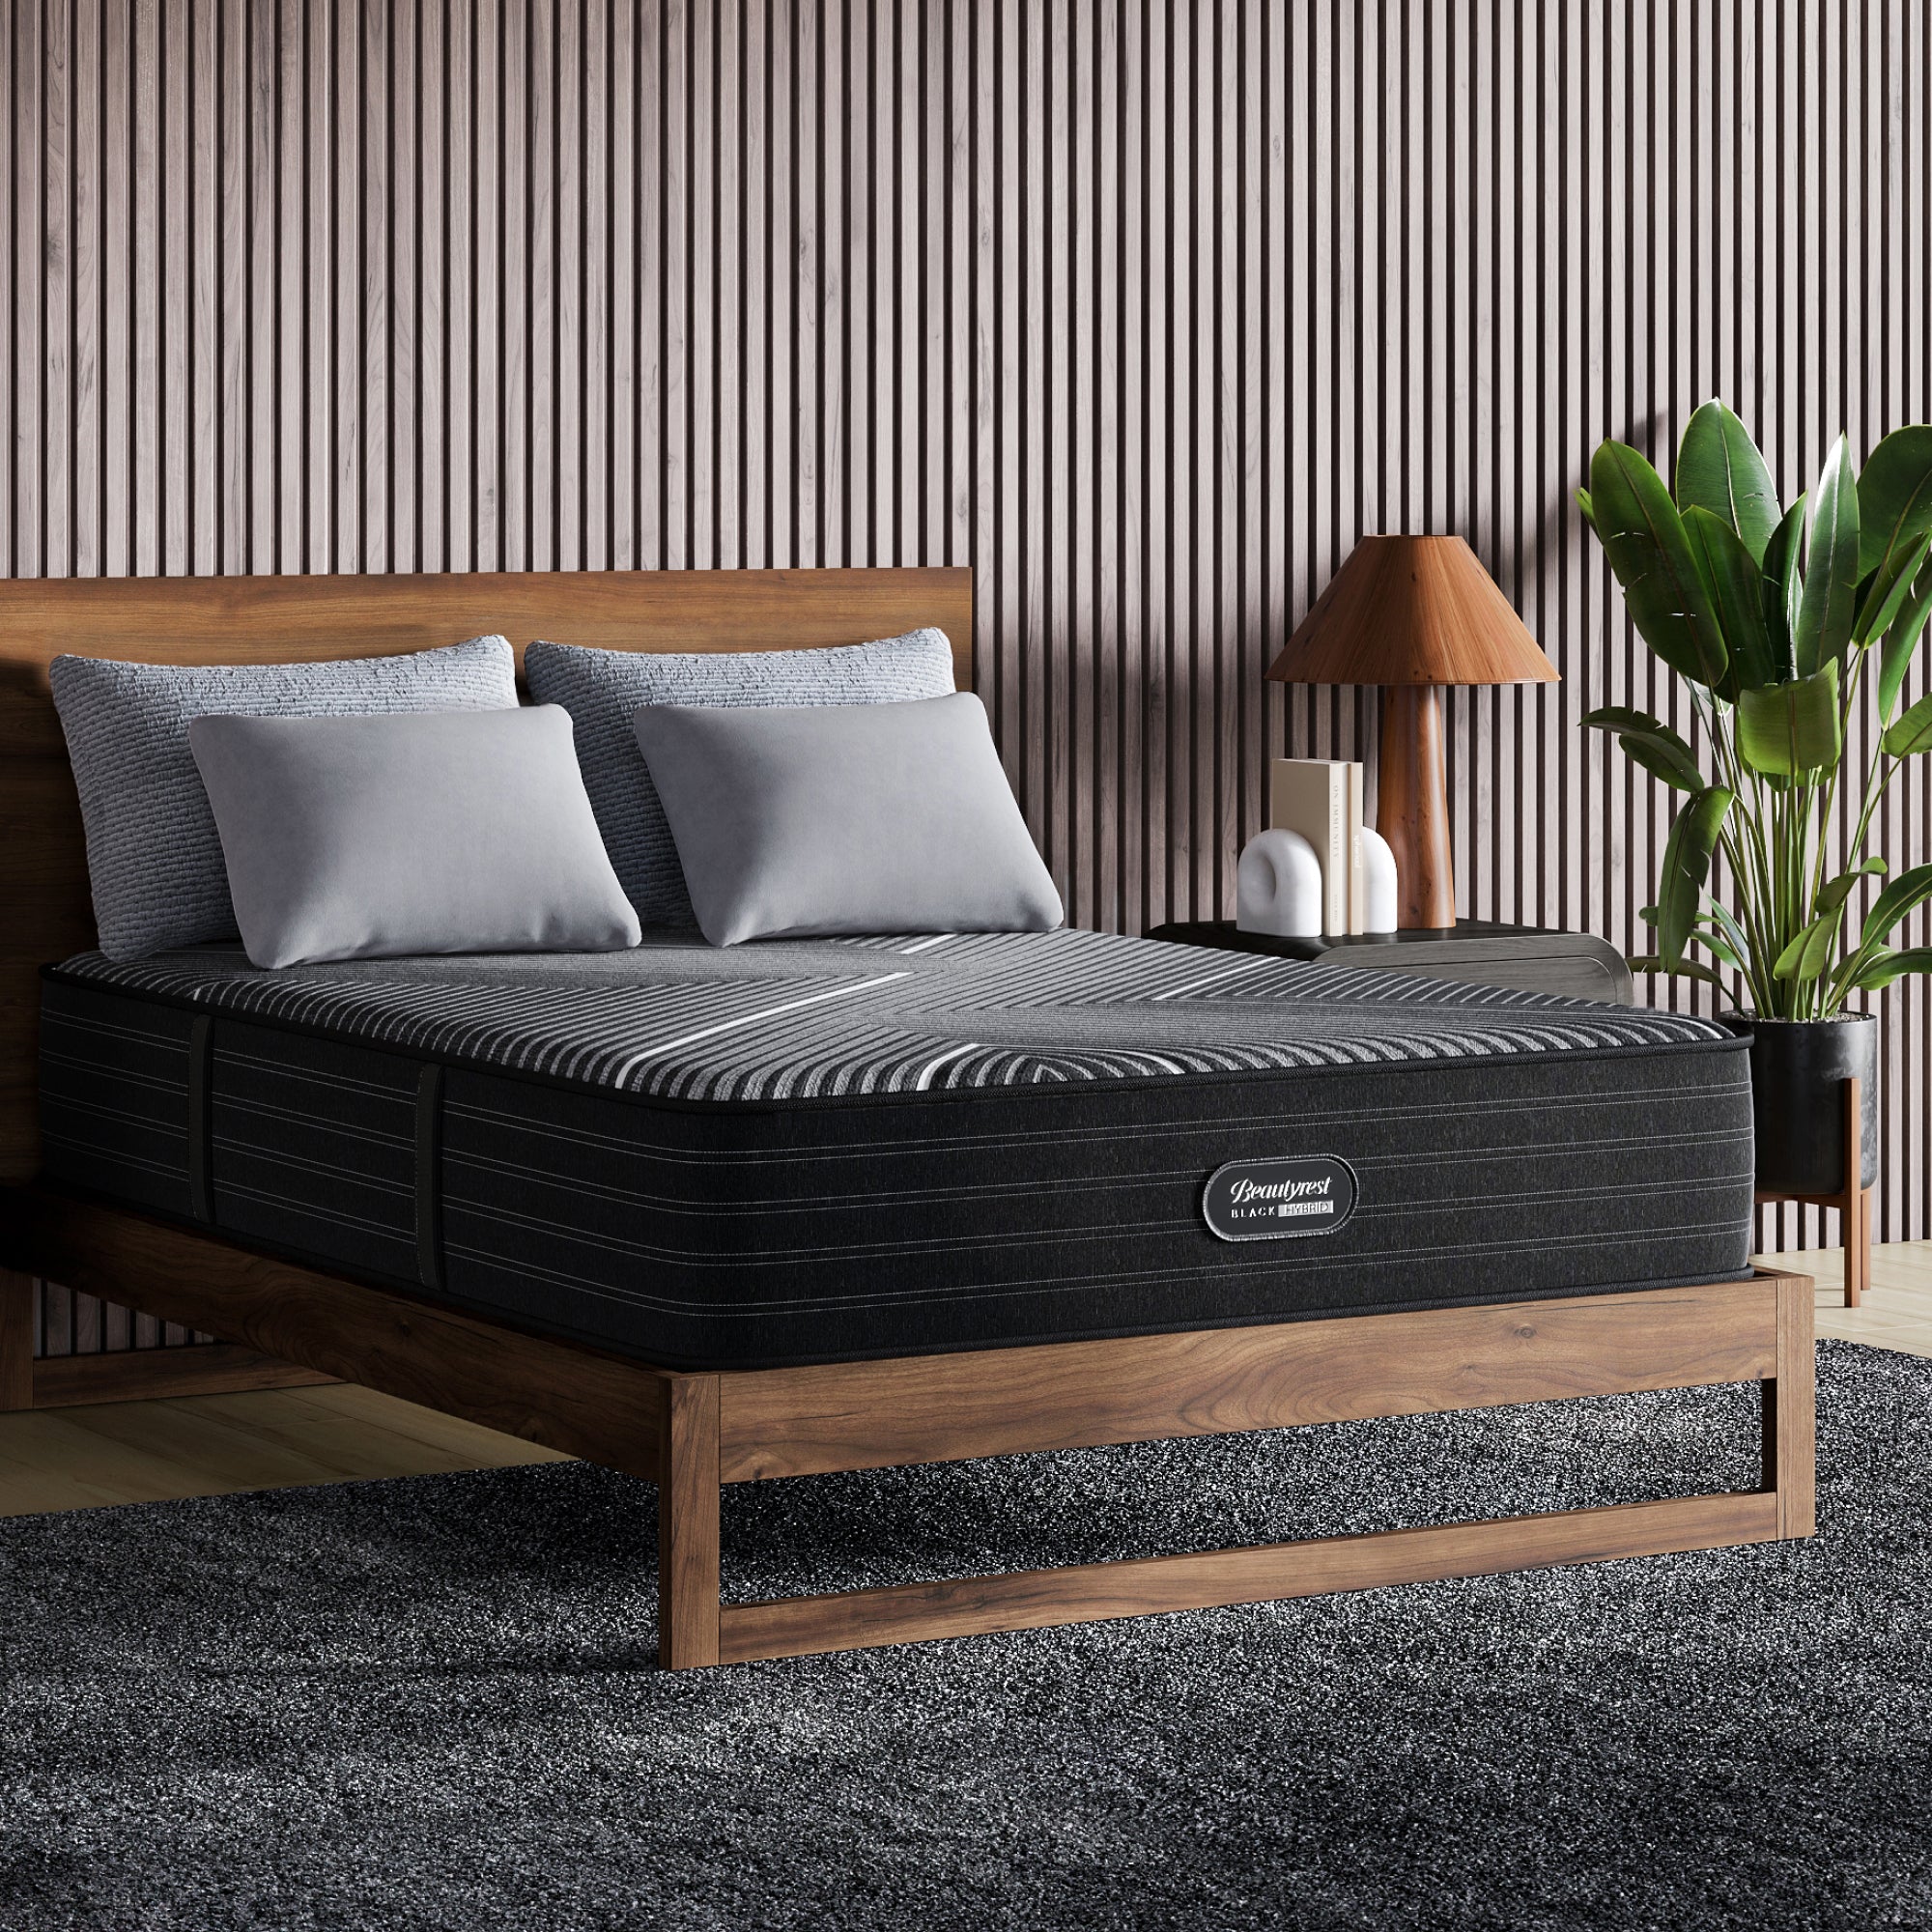 The Beautyrest Black hybrid mattress in a bedroom on a wooden bed || series: grand bx-class || feel: plush